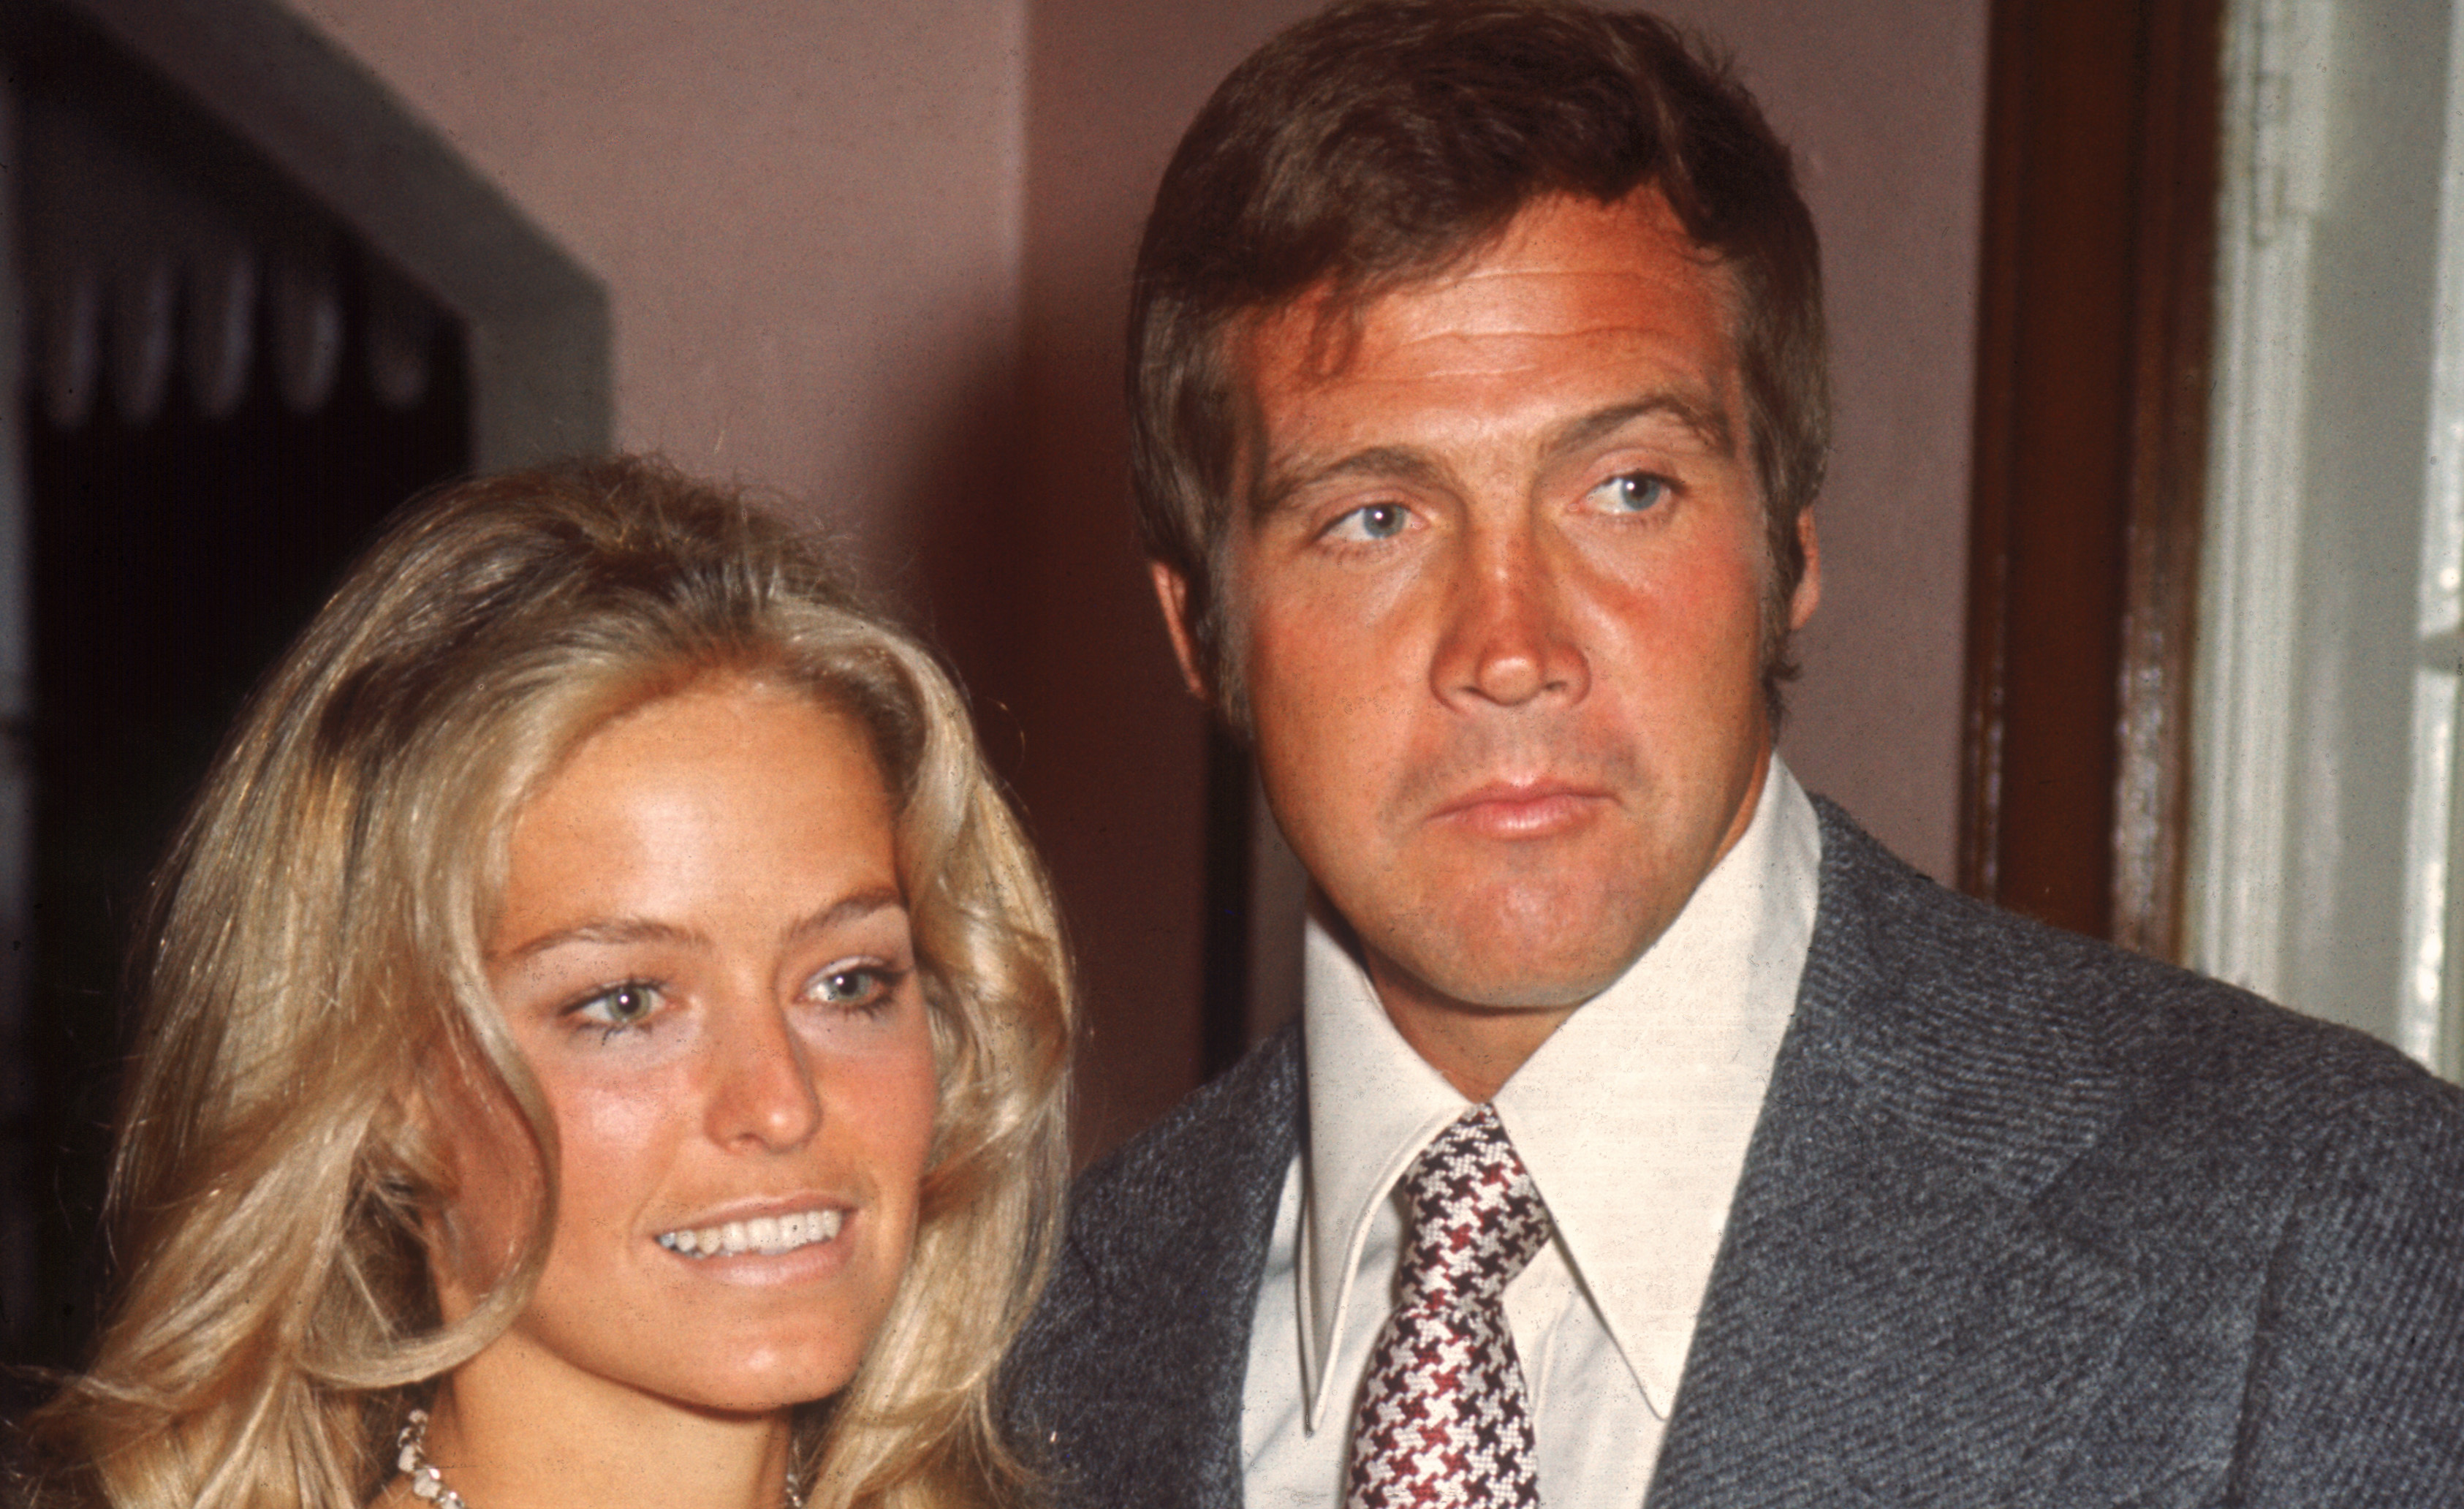 Lee Majors Gushes Late Ex-Wife Farrah Fawcett Was 'One of a Kind'